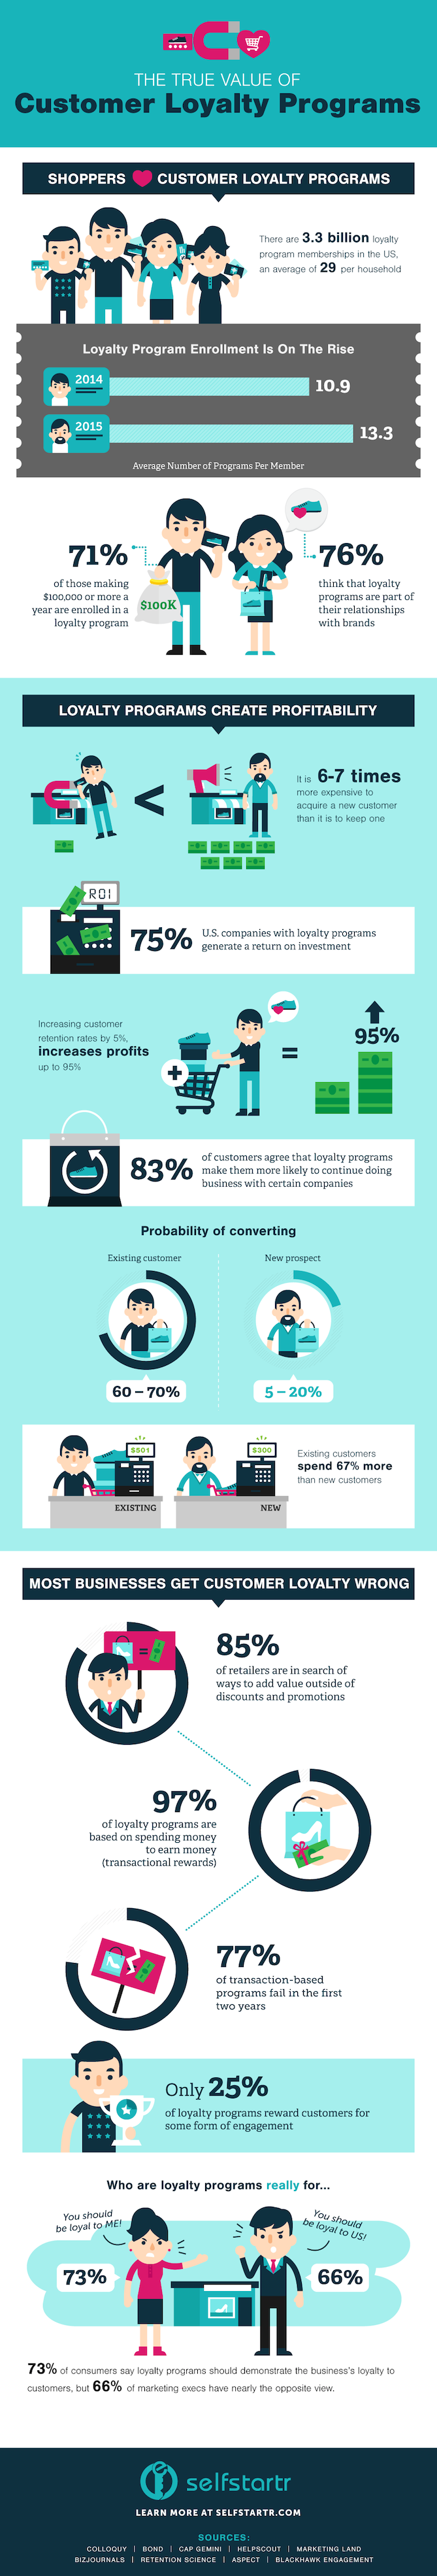 customer-loyalty-programs-infographic.png